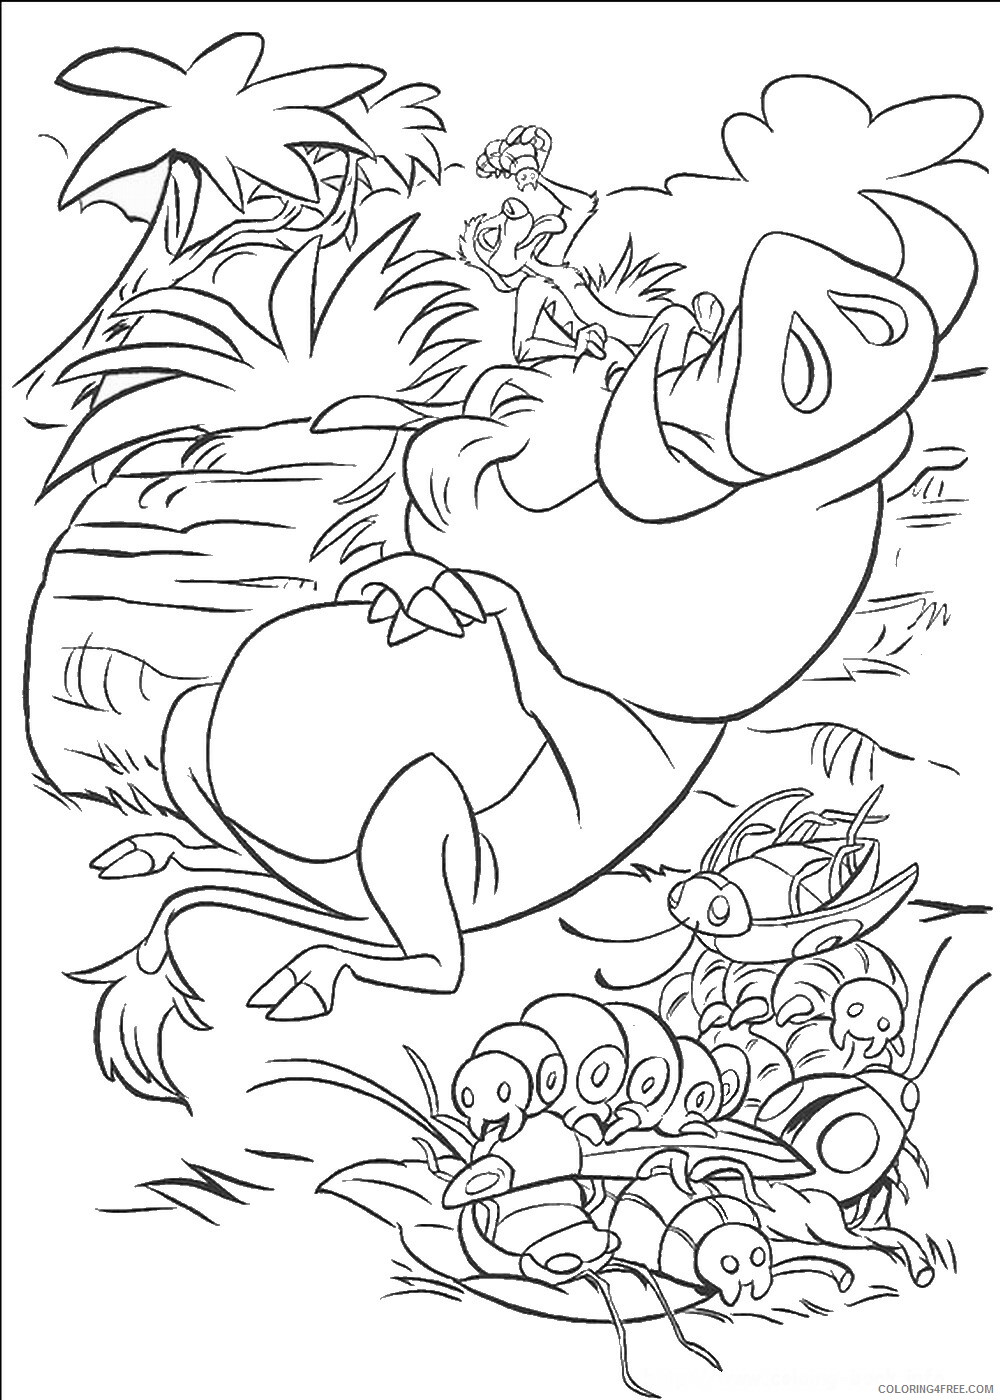 The Lion King Coloring Pages TV Film lionking_69 Printable 2020 09186 Coloring4free